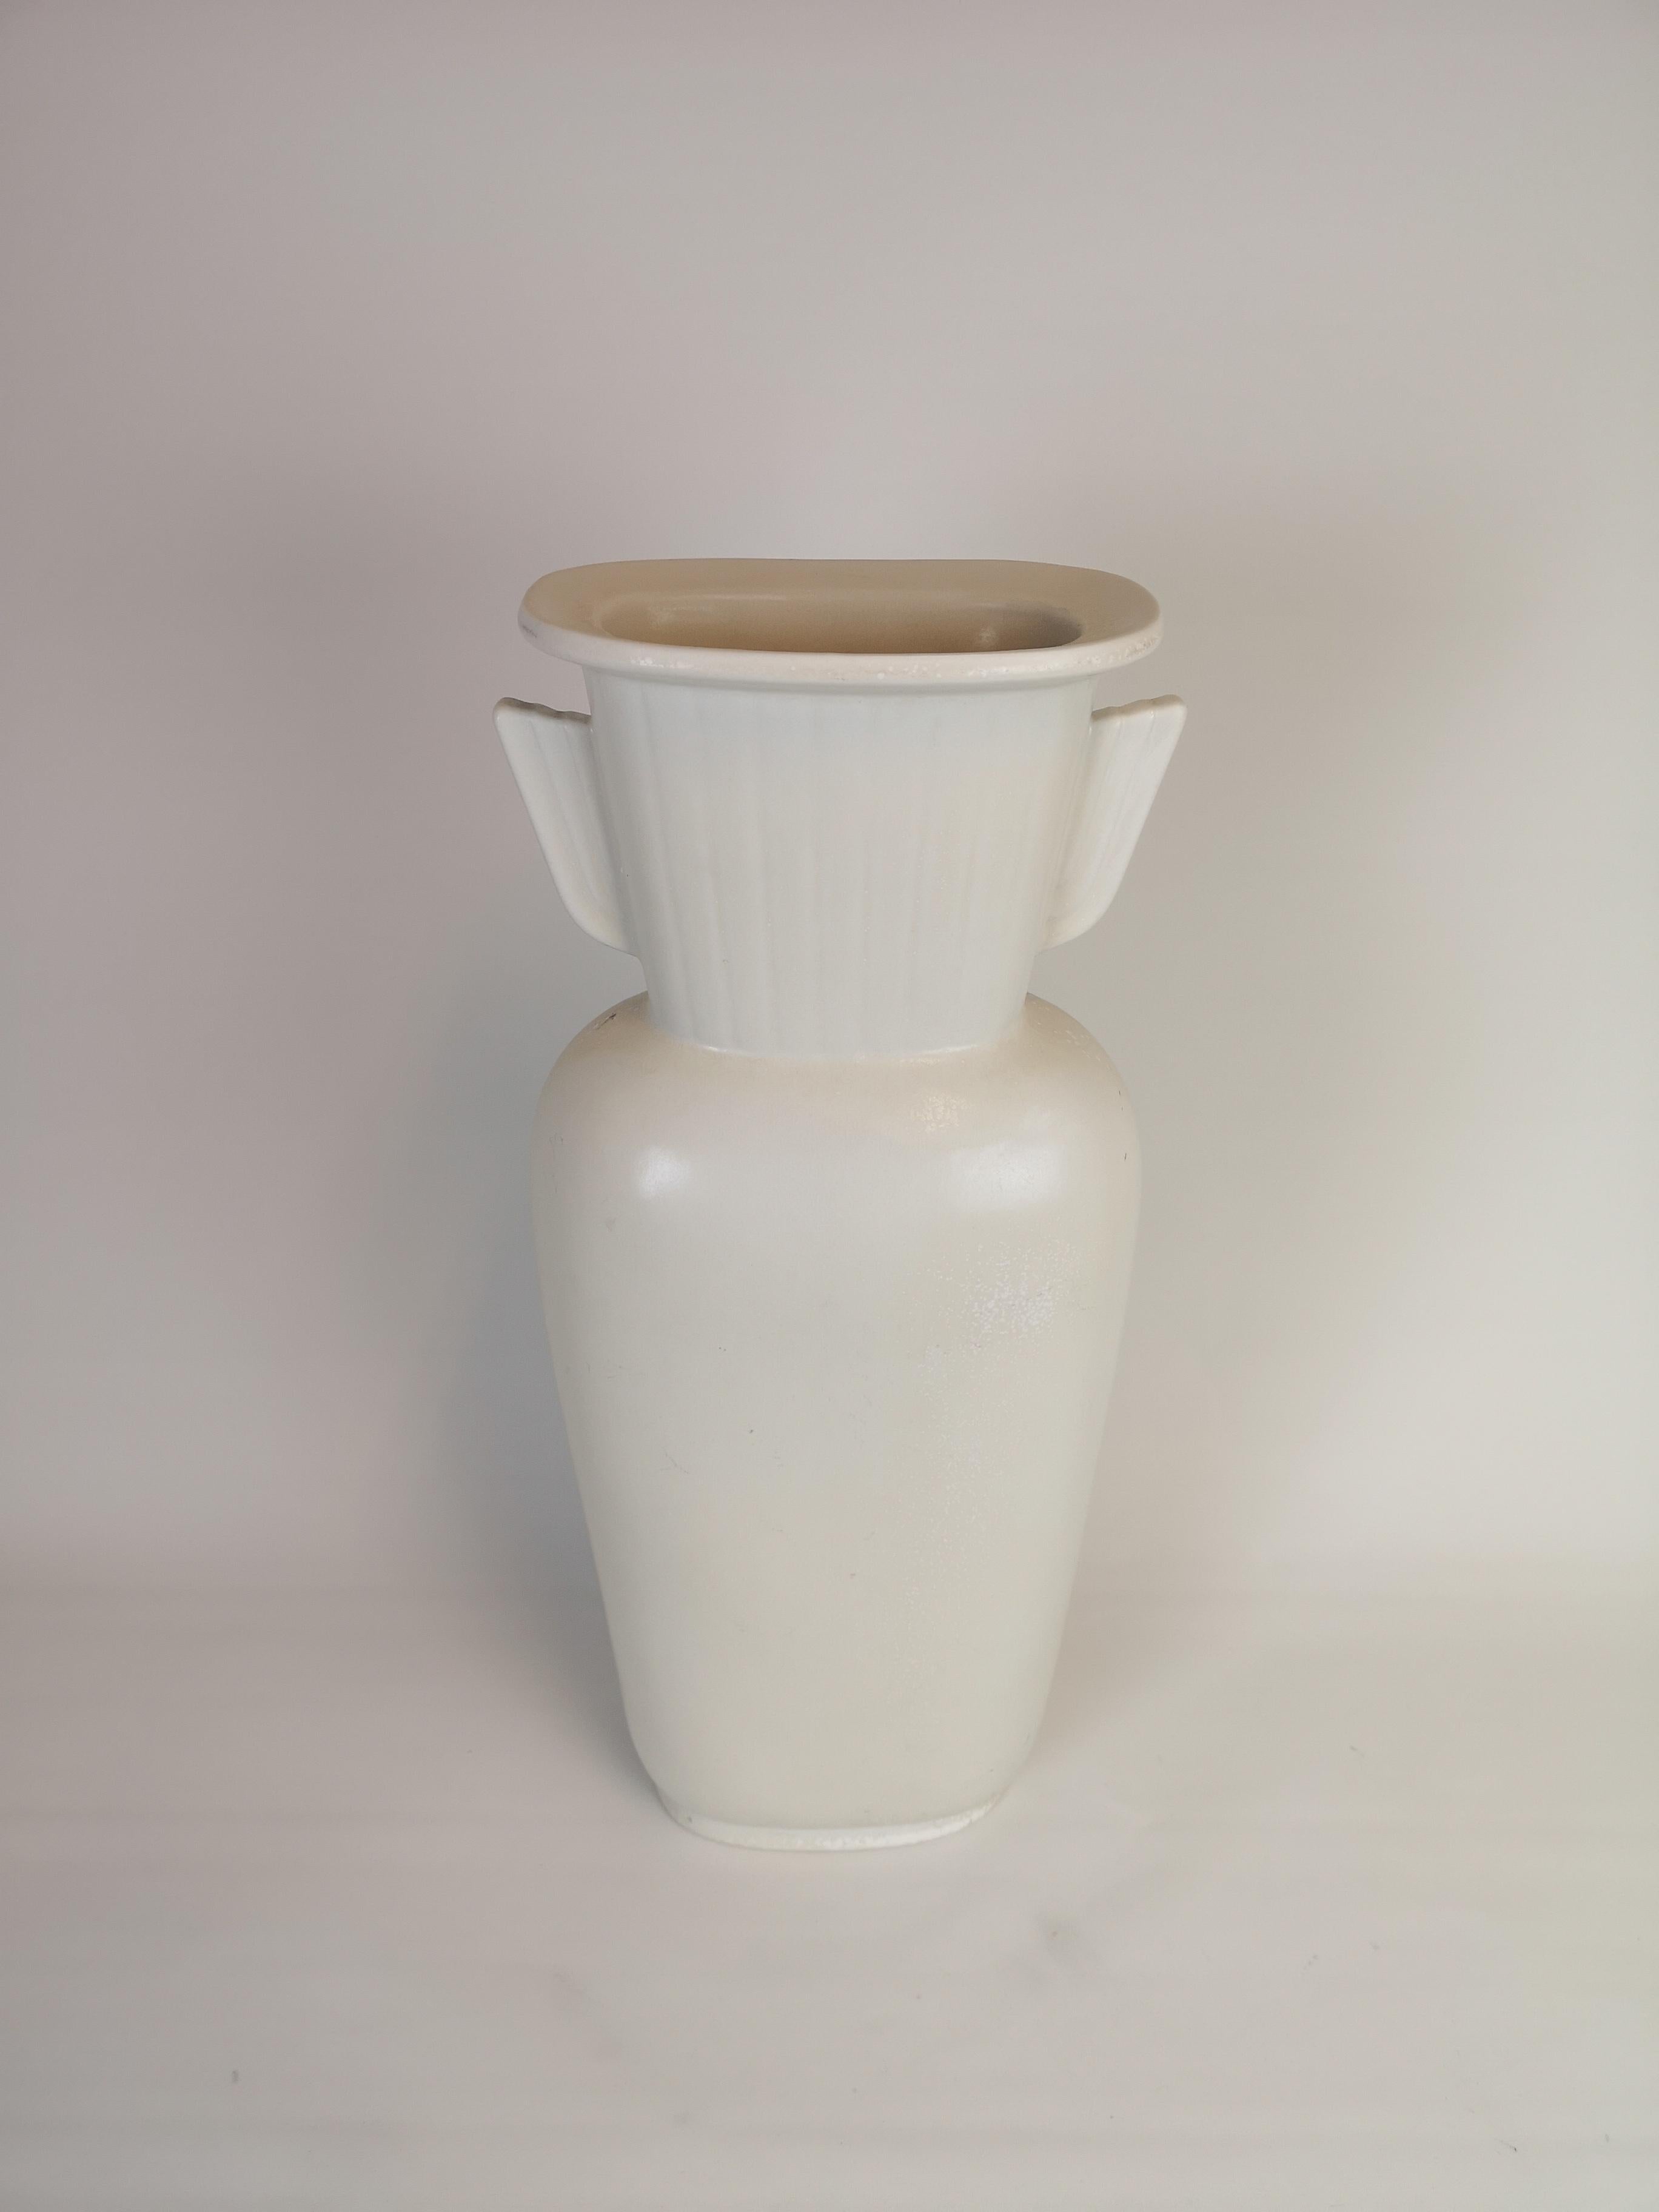 This stunning vase was made in Sweden at Rörstrand and designed by Gunnar Nylund. 

The structure of the vase is a reminder of how the ancient Greek urn and vases vas done. However, this one, also got a very nice glaze.

Good condition with some